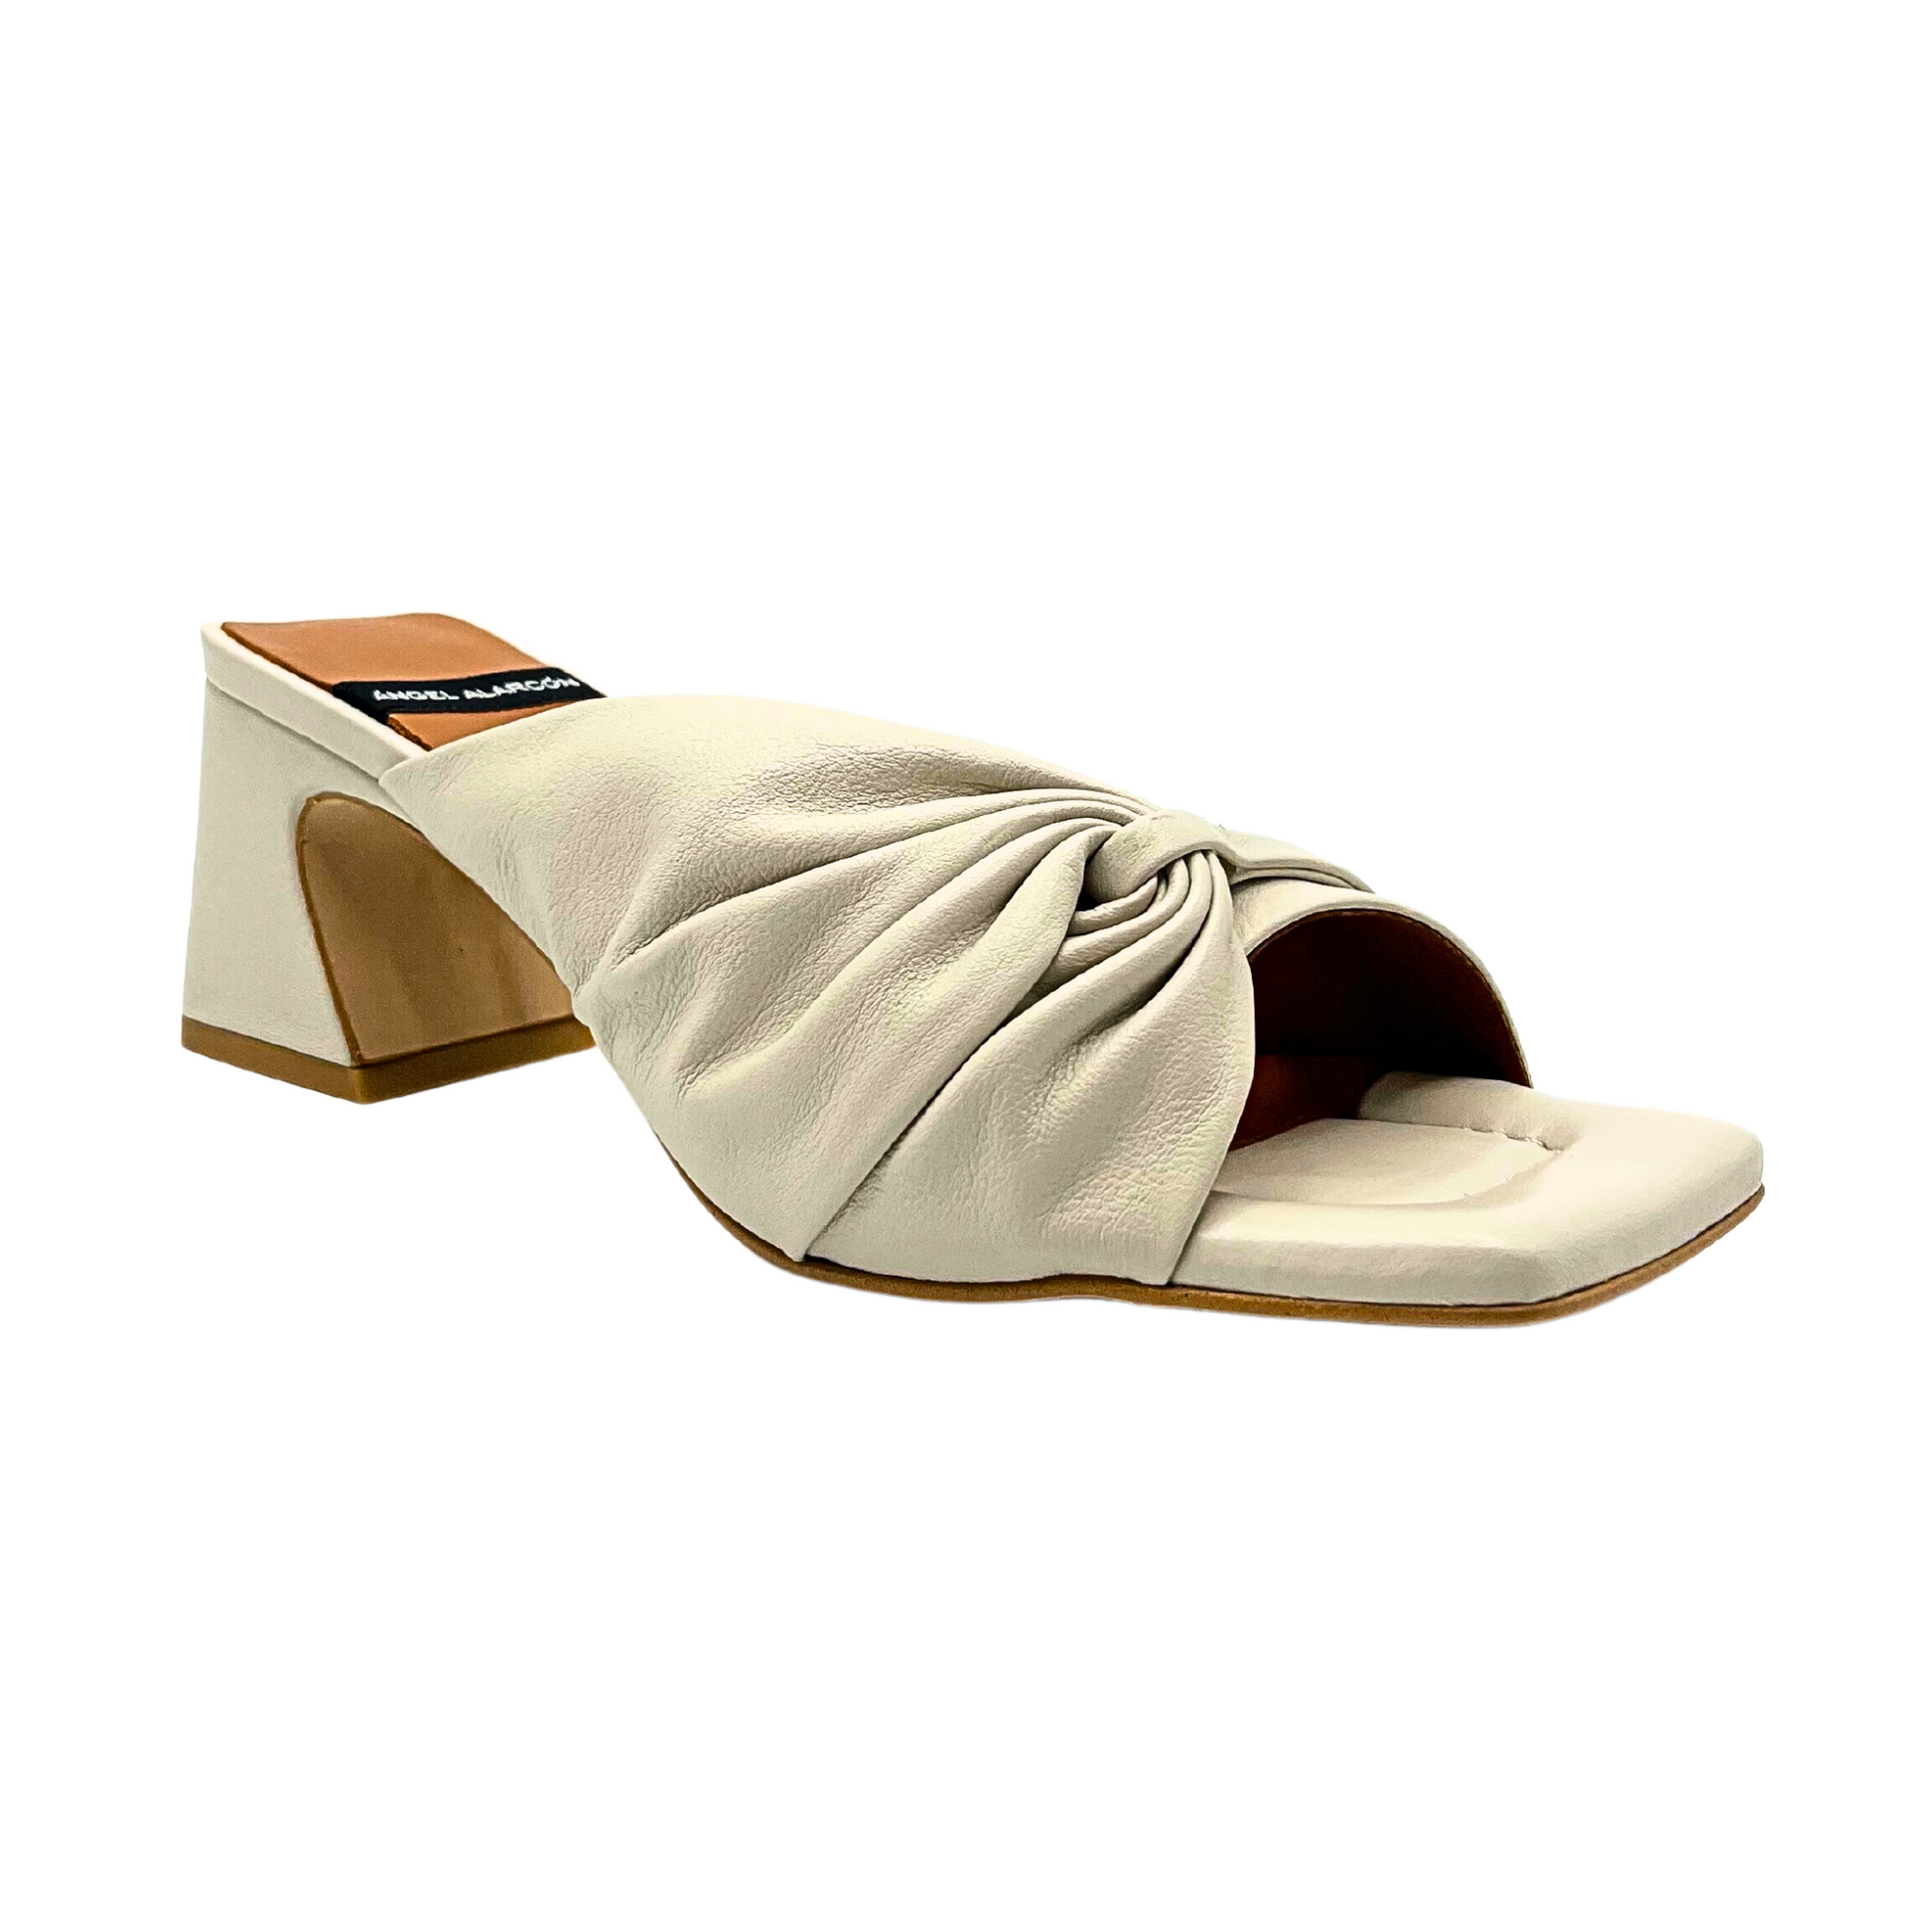 Angel Alarcon Gala mule pictured from outside angle of right shoe.  Features puckered rosette detail across the top on outside